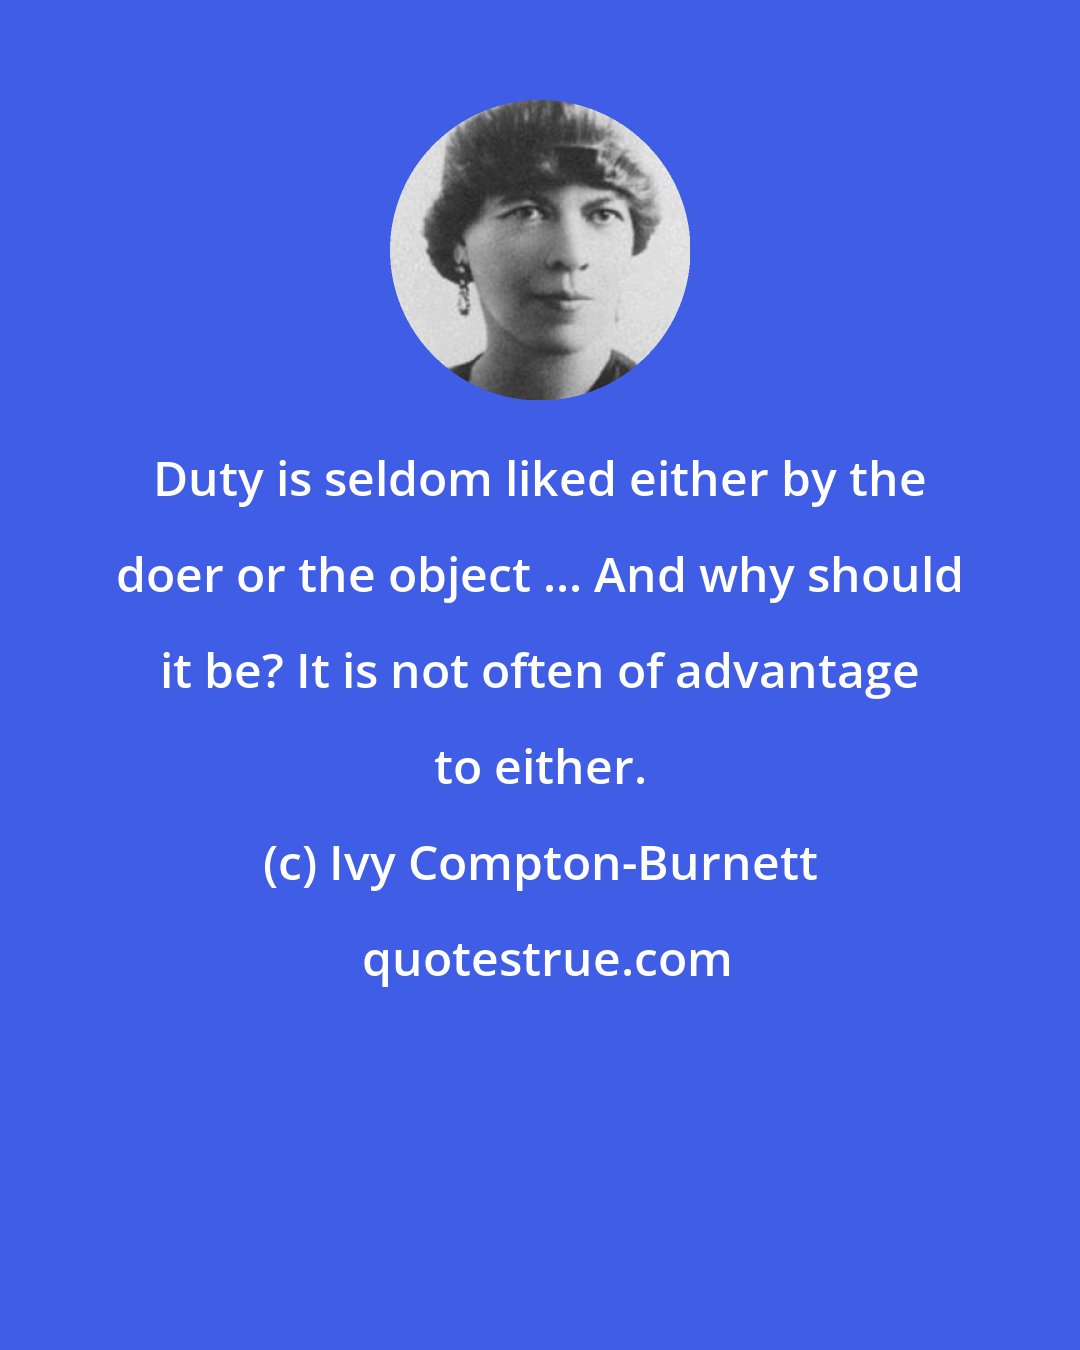 Ivy Compton-Burnett: Duty is seldom liked either by the doer or the object ... And why should it be? It is not often of advantage to either.